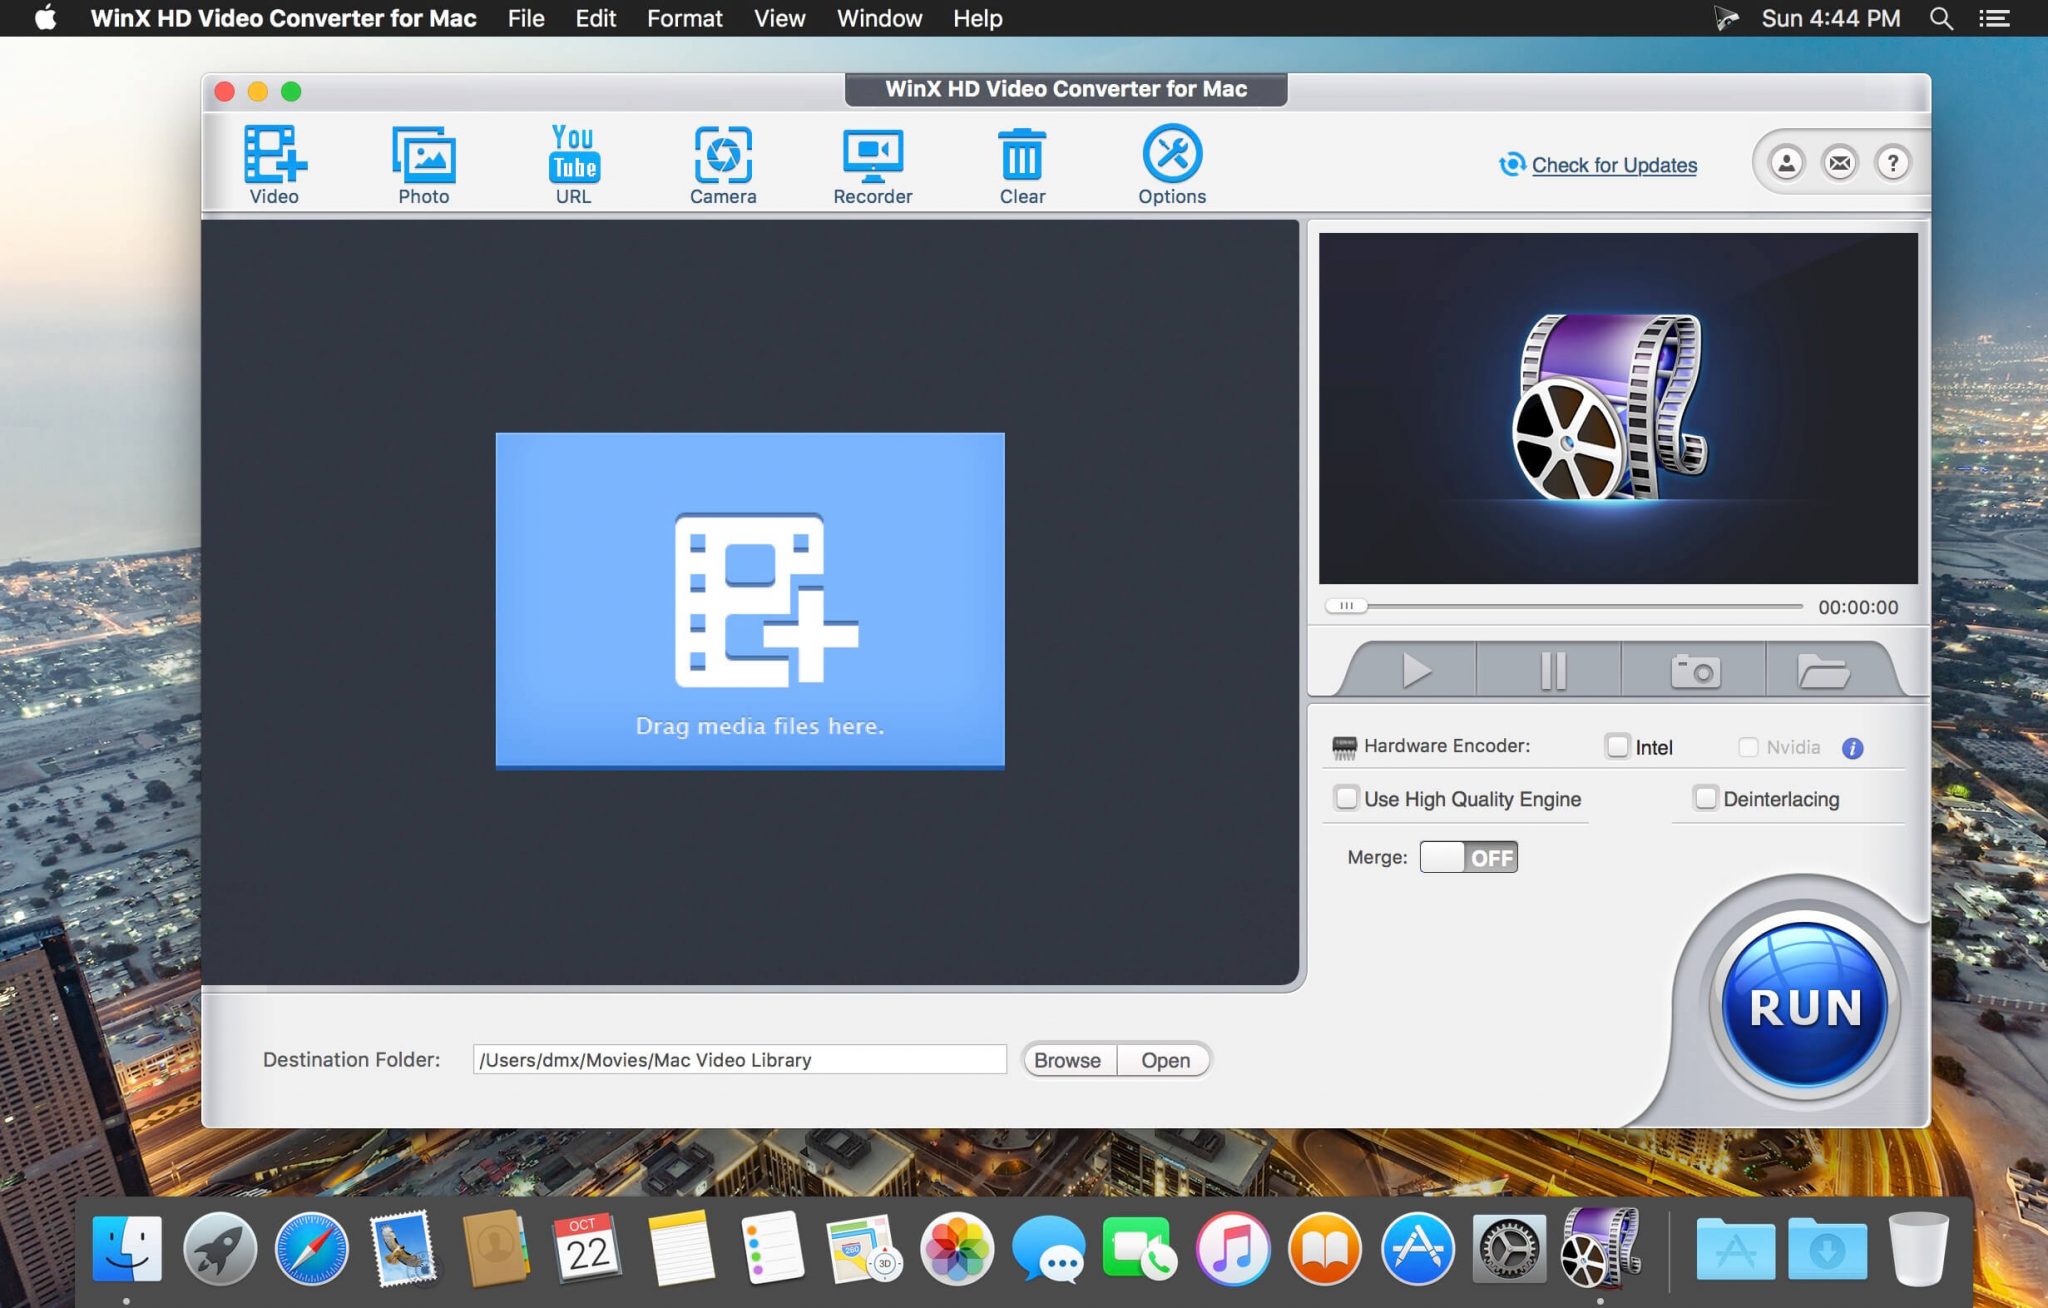 1080p video convertor for mac free download